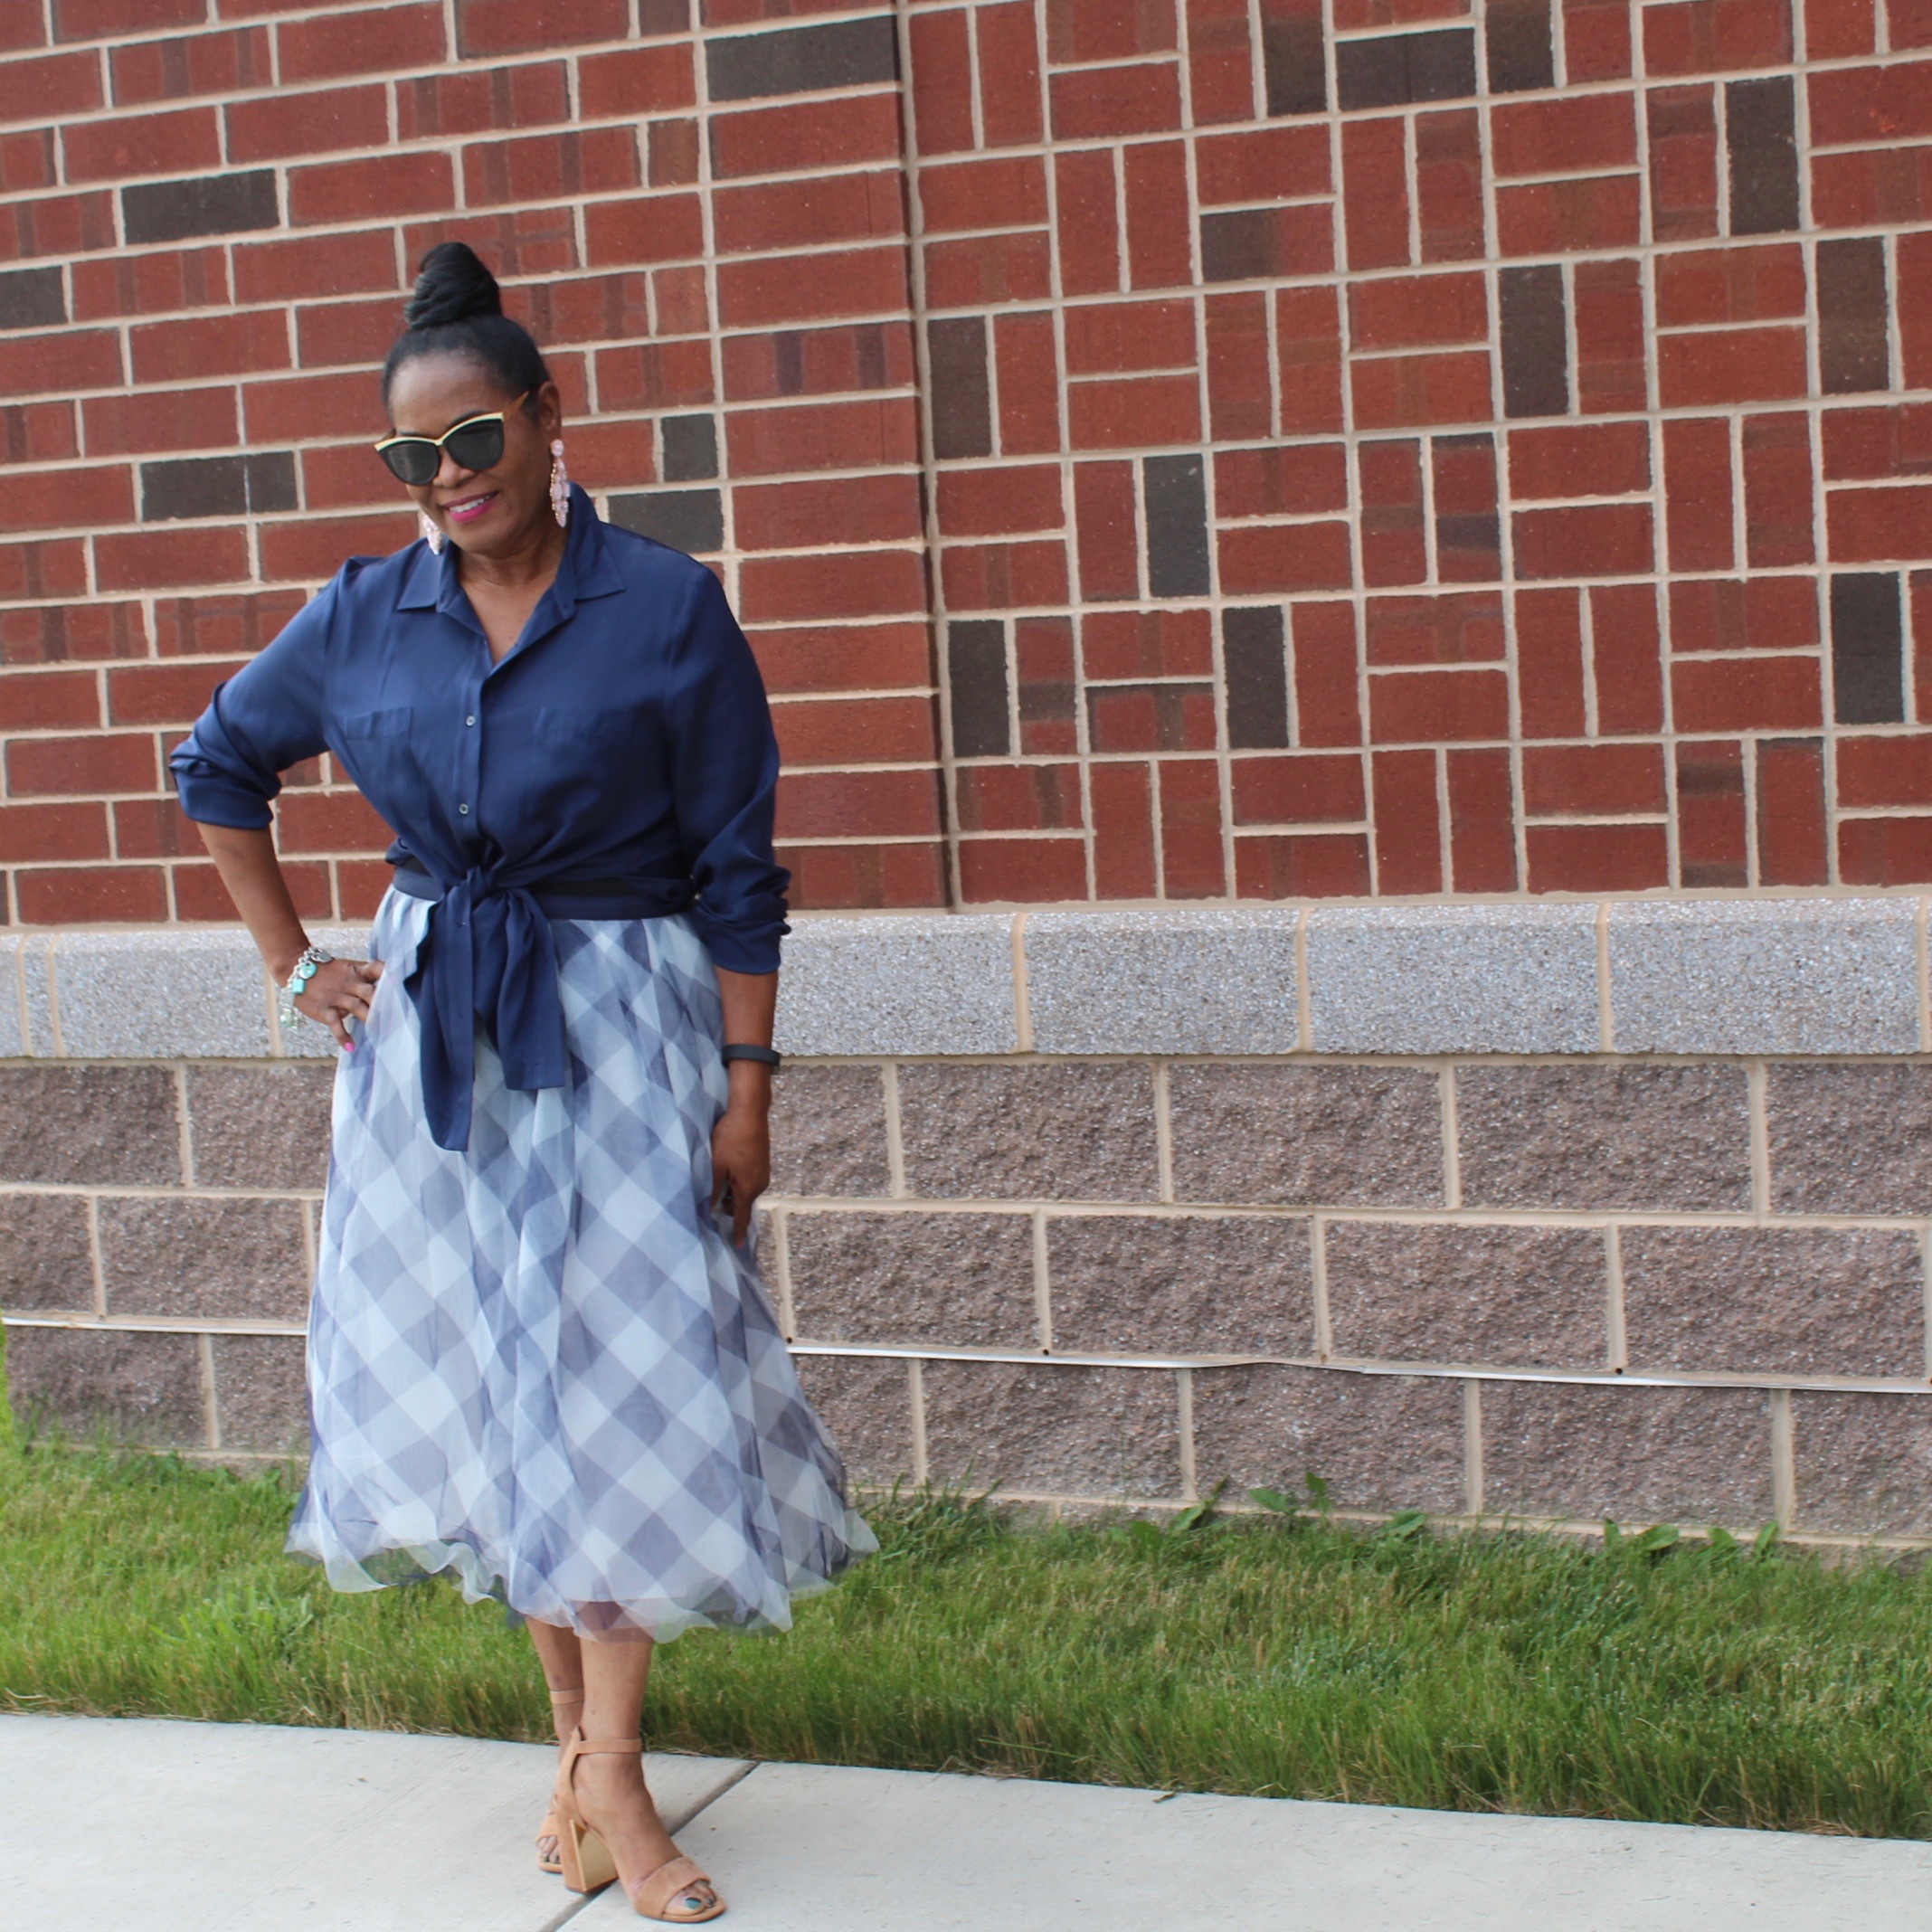 J. Crew Tulle Skirt with Repeat Button down Navy Silk Blouse and my sensitive bladder